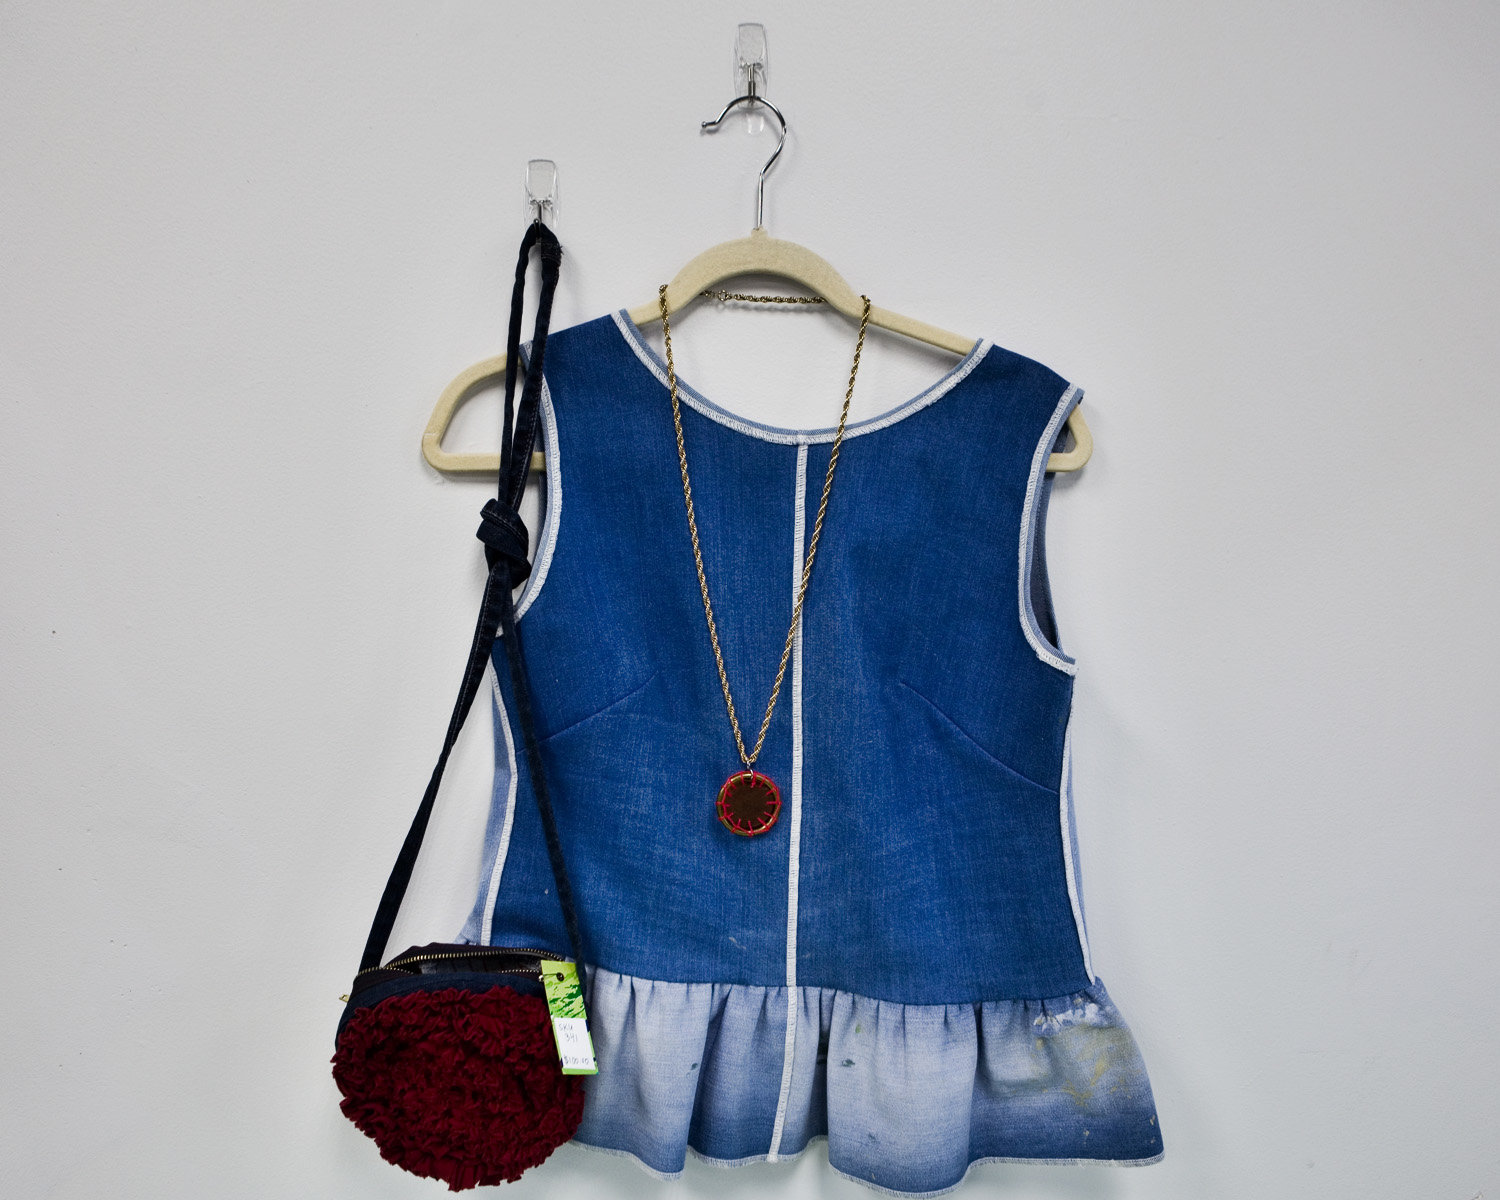 Examples of upcycled clothing for sale at the shop.